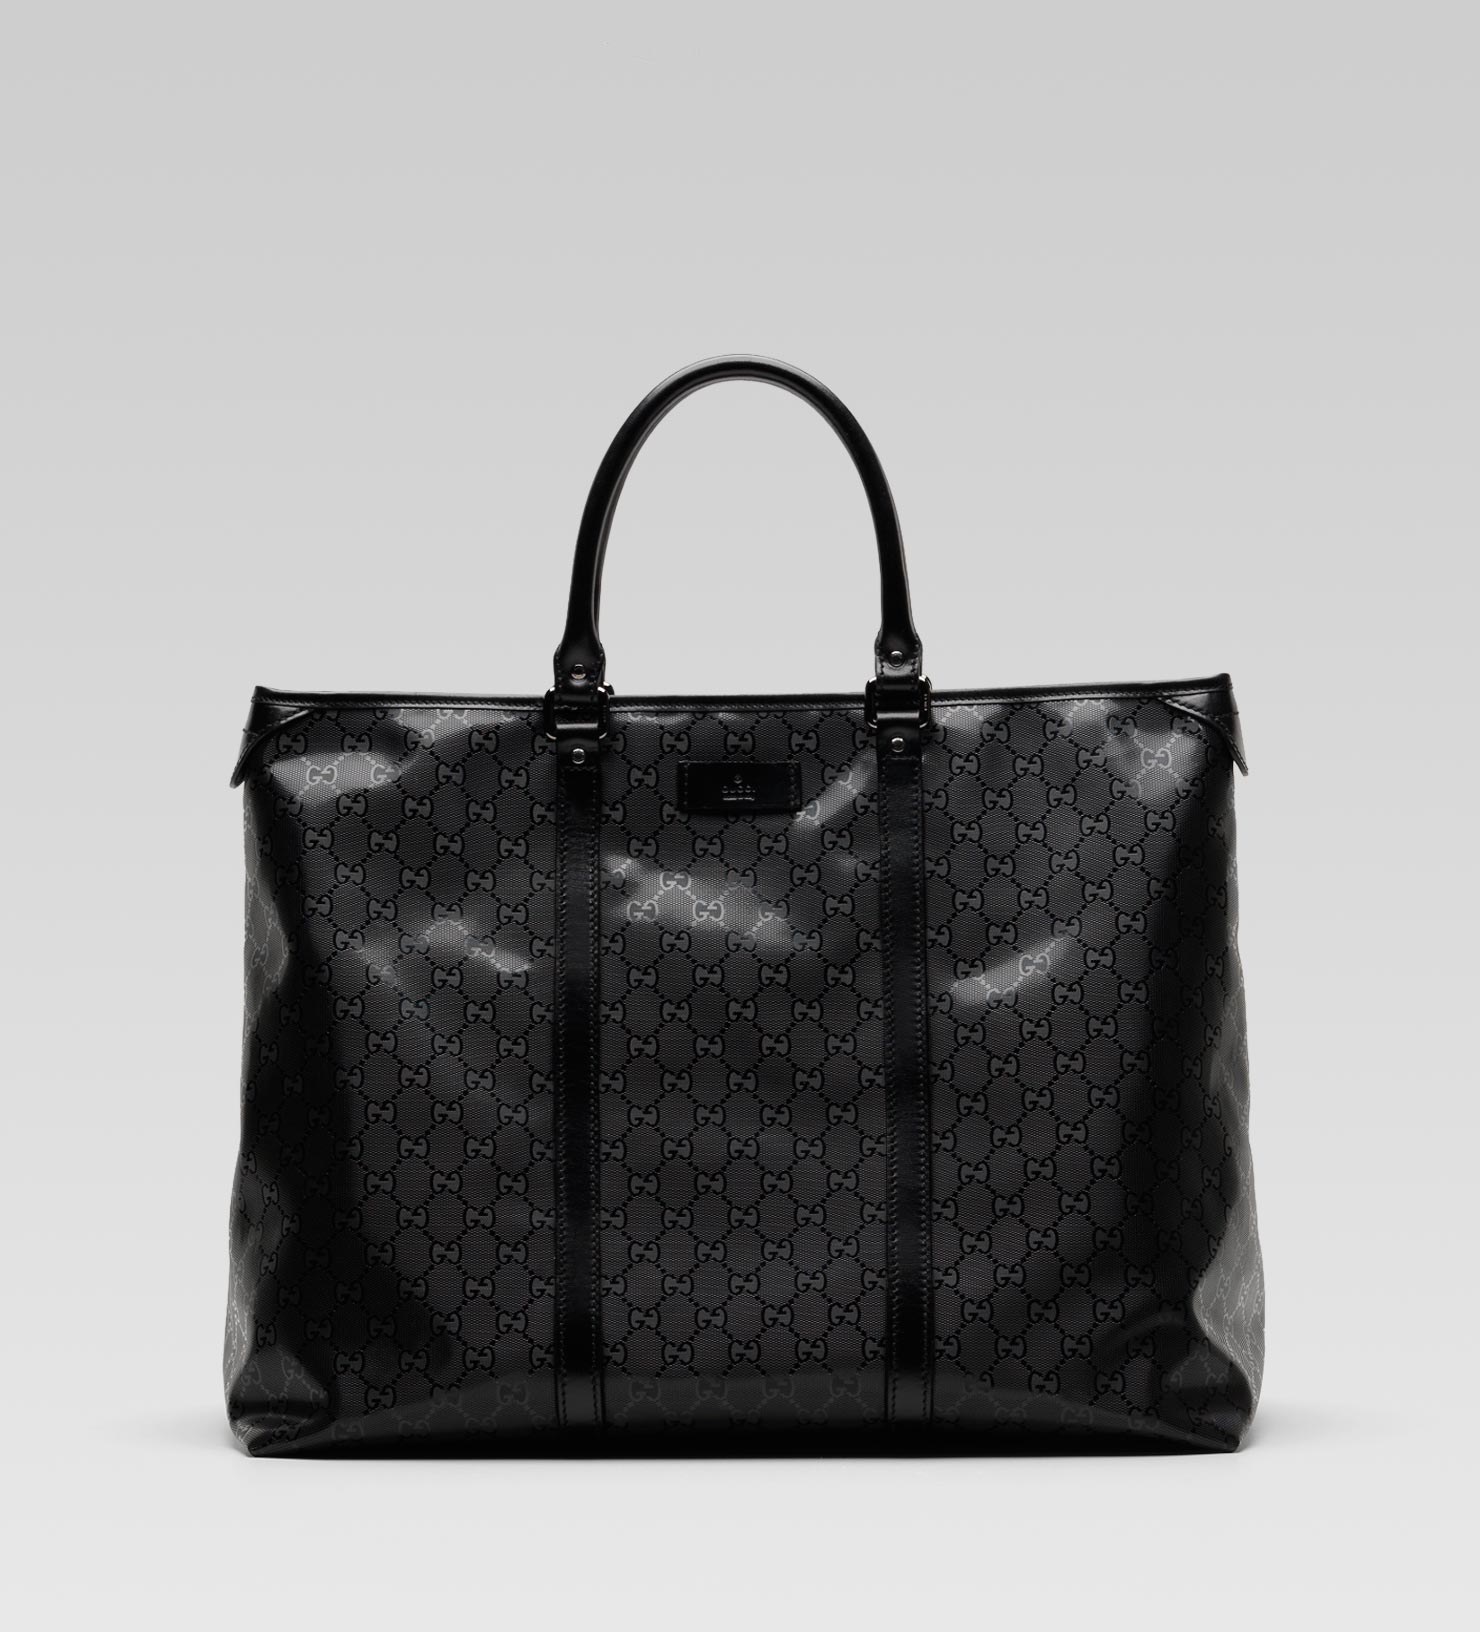 Gucci Tote Bag in Black for Men - Lyst